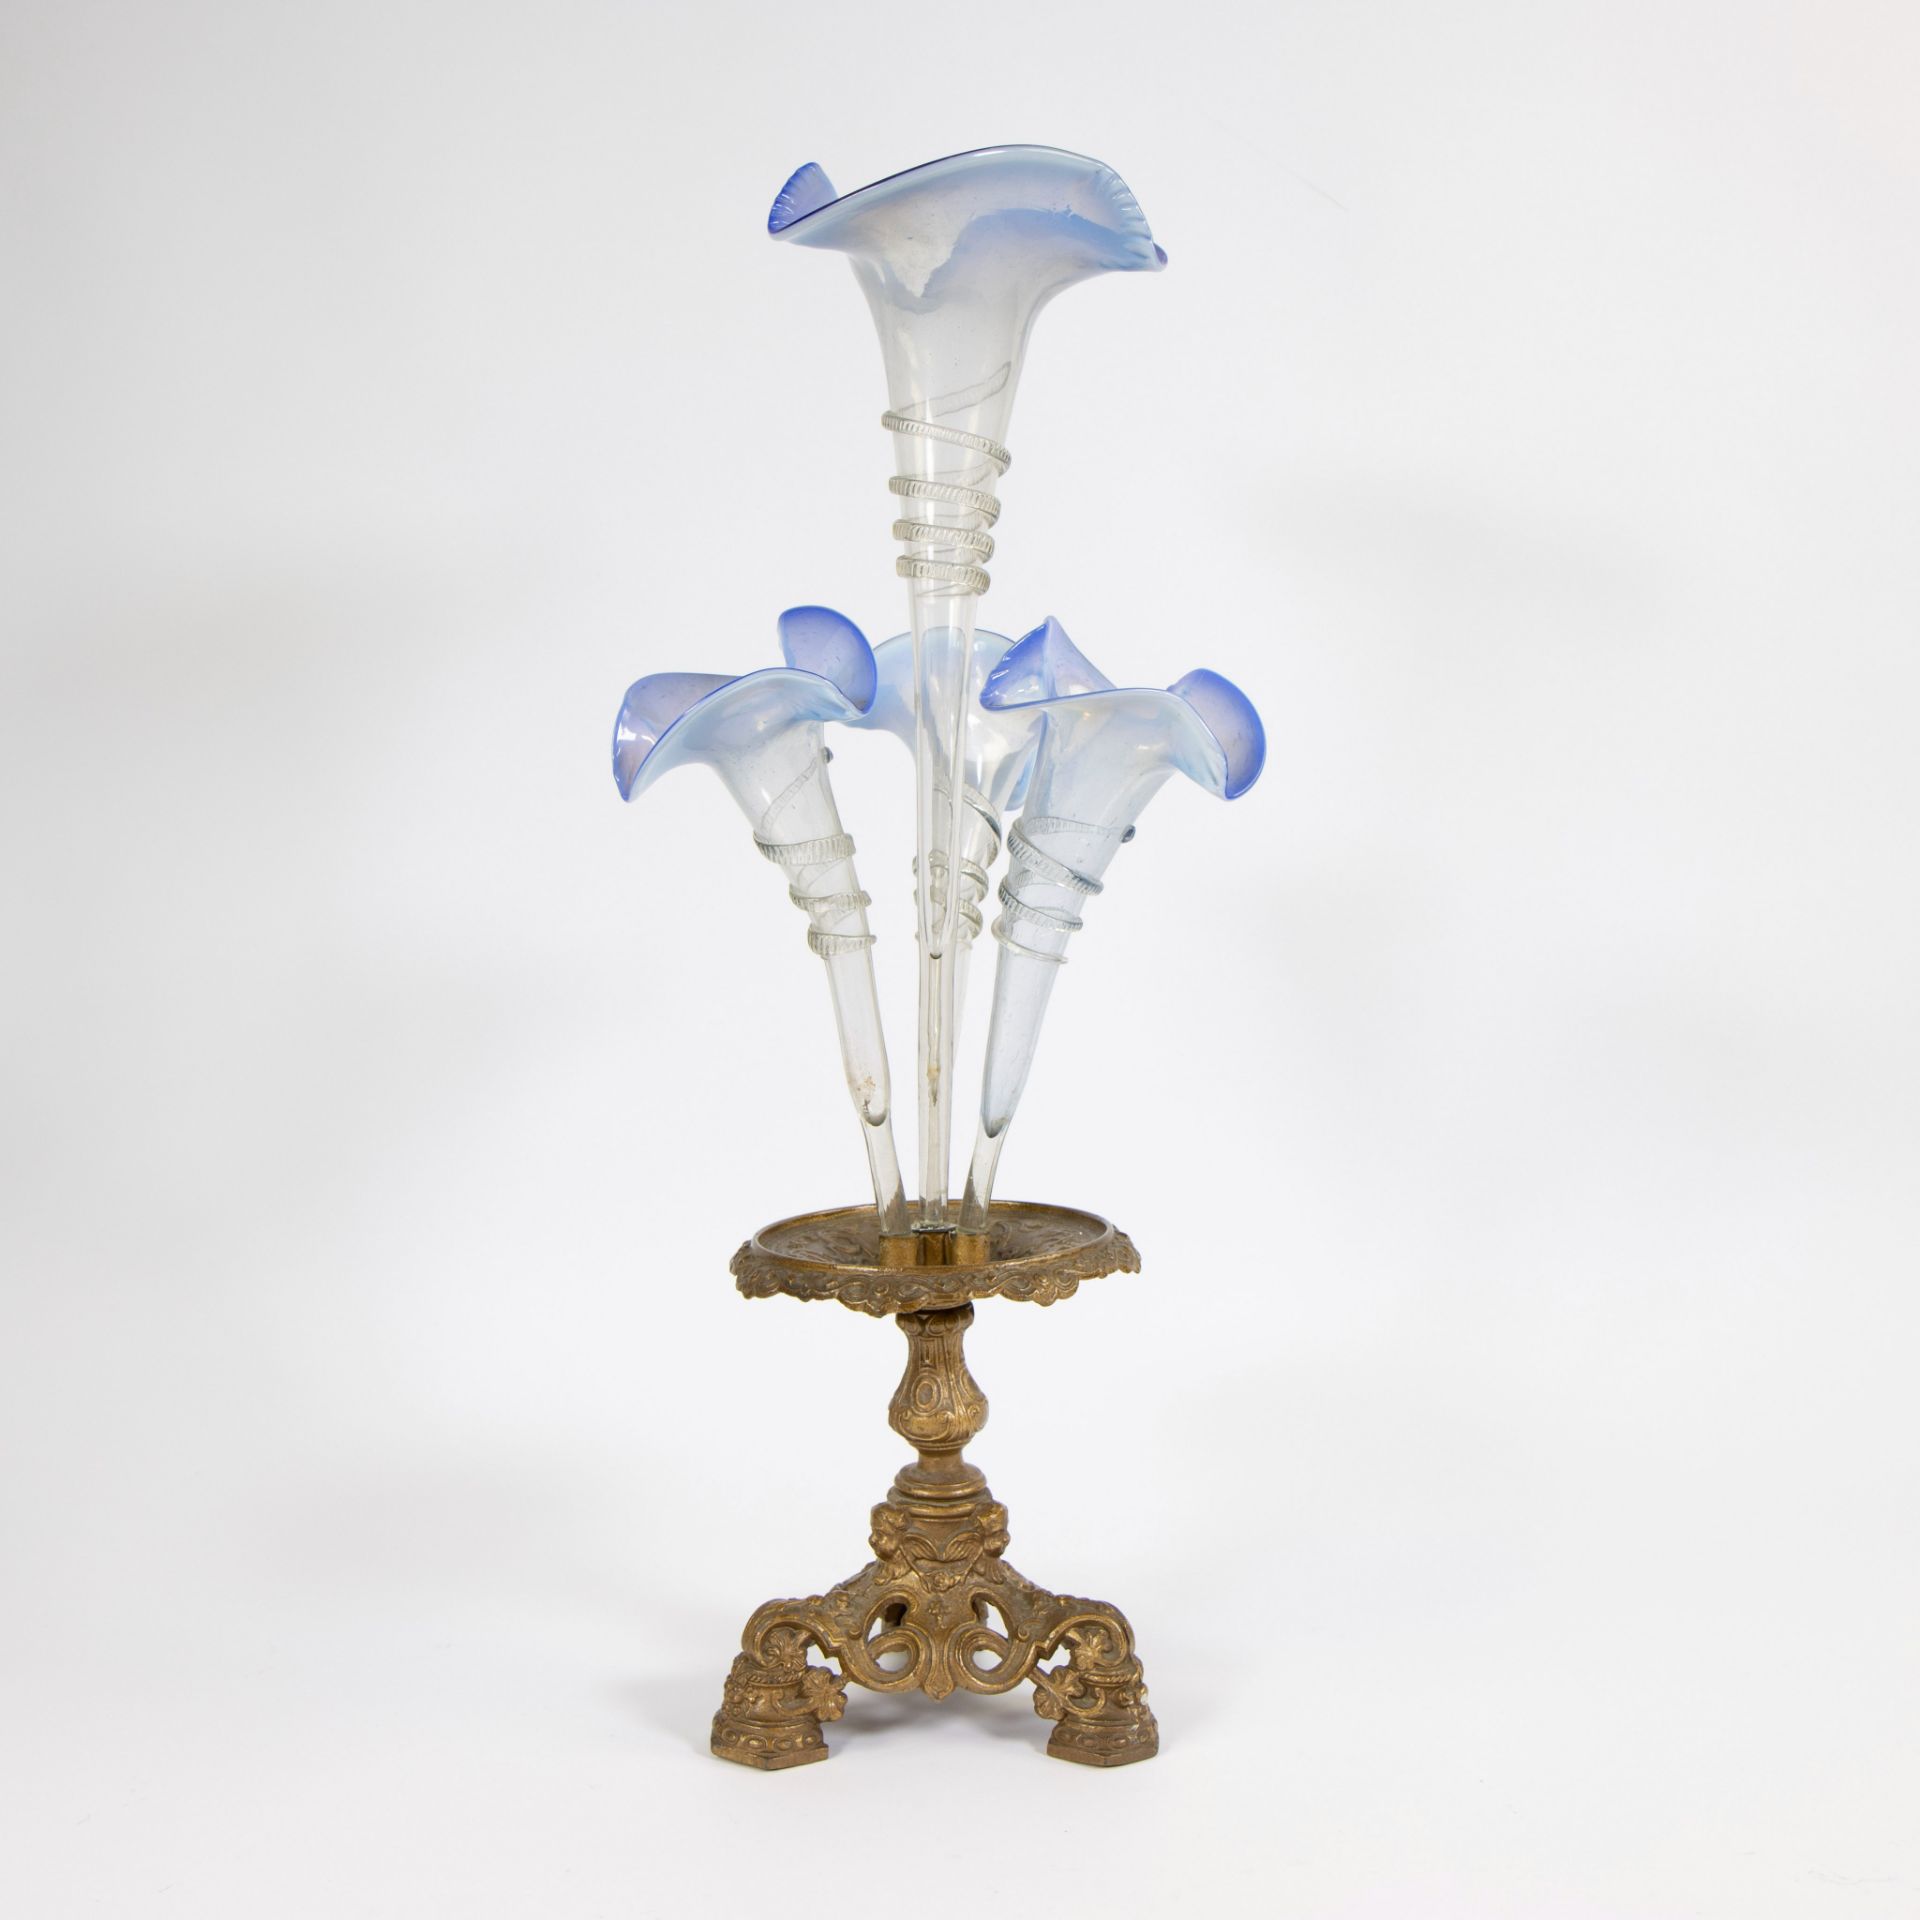 Metal base with soliflore vases in Venetian glass + glass walking stick, circa 1900 - Image 3 of 6